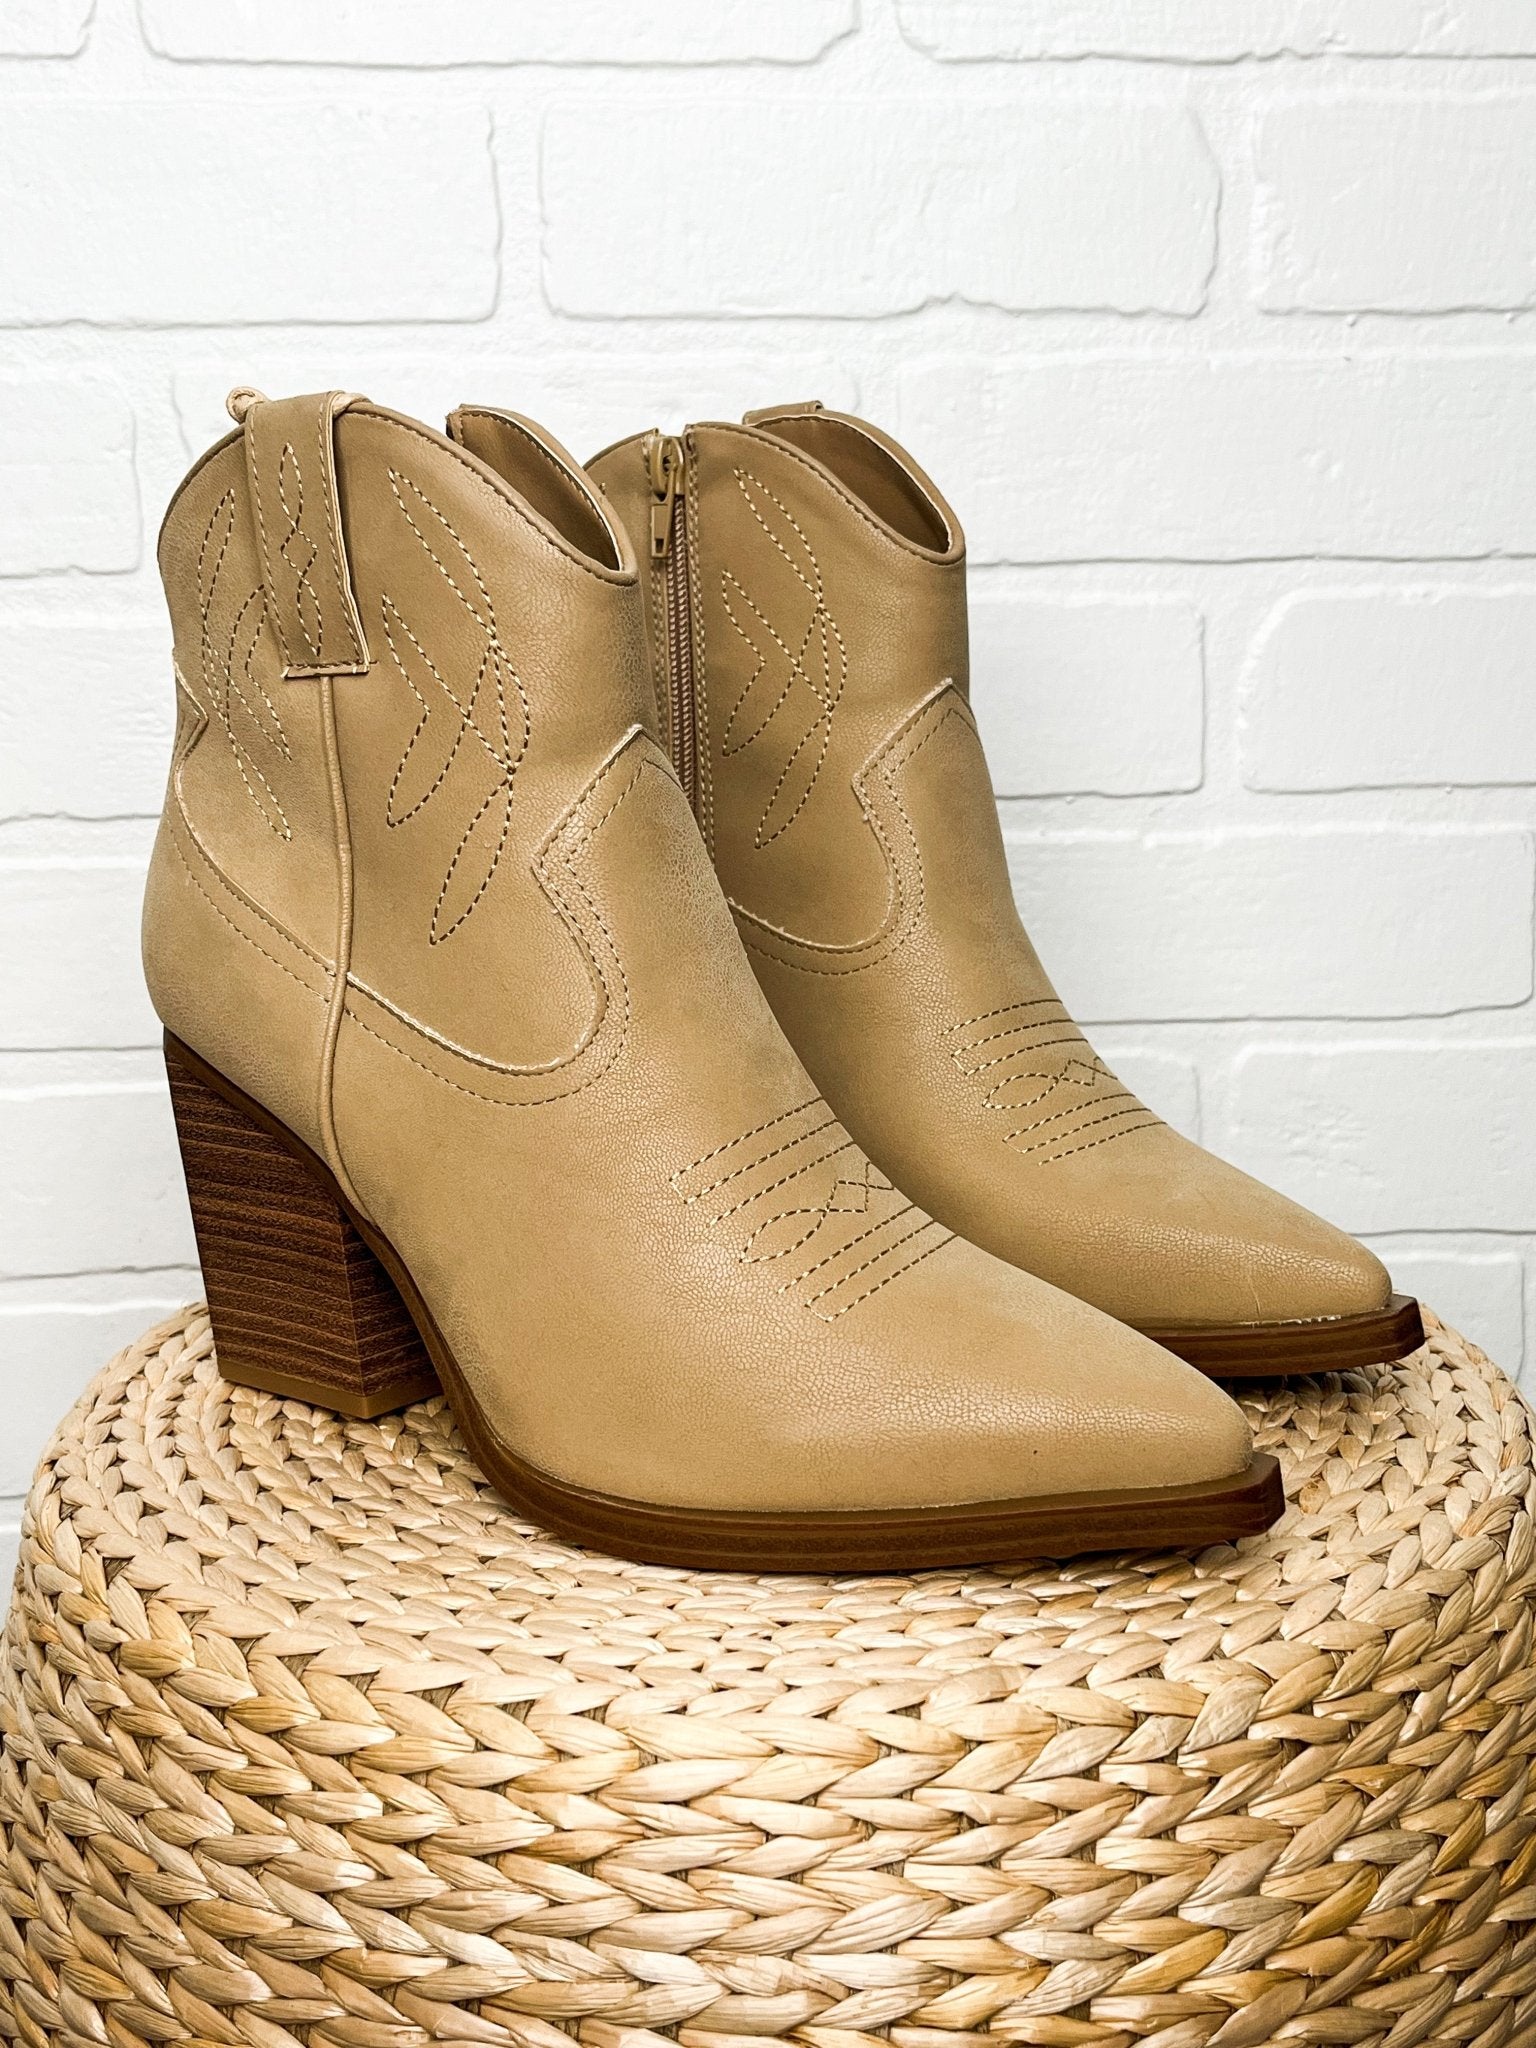 Sawyer ankle cowboy boots natural - Trendy boots - Fashion Shoes at Lush Fashion Lounge Boutique in Oklahoma City